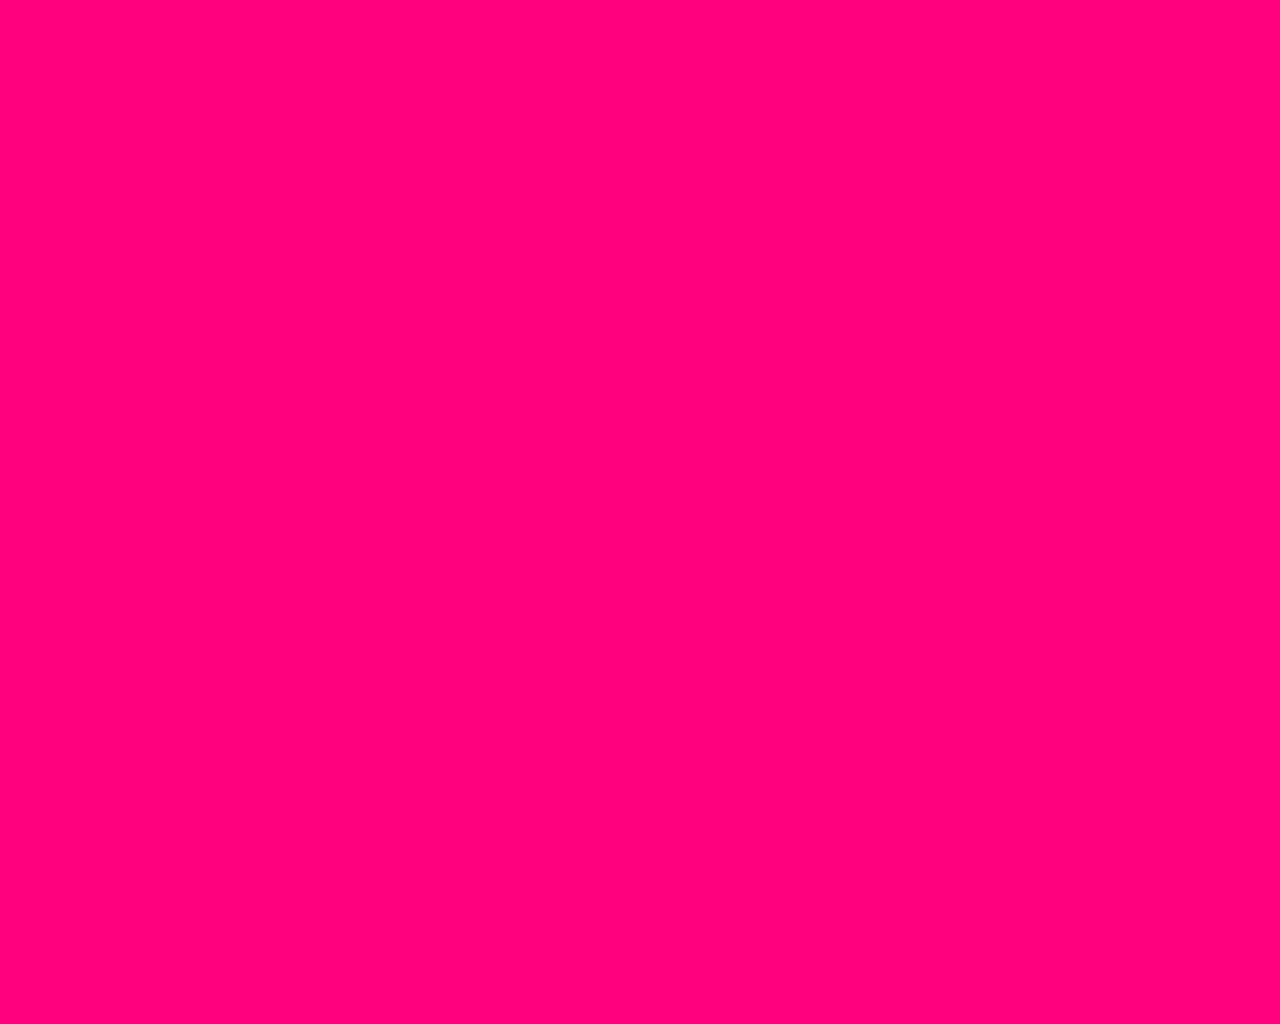 Free 1280x1024 resolution Bright Pink solid color background view and